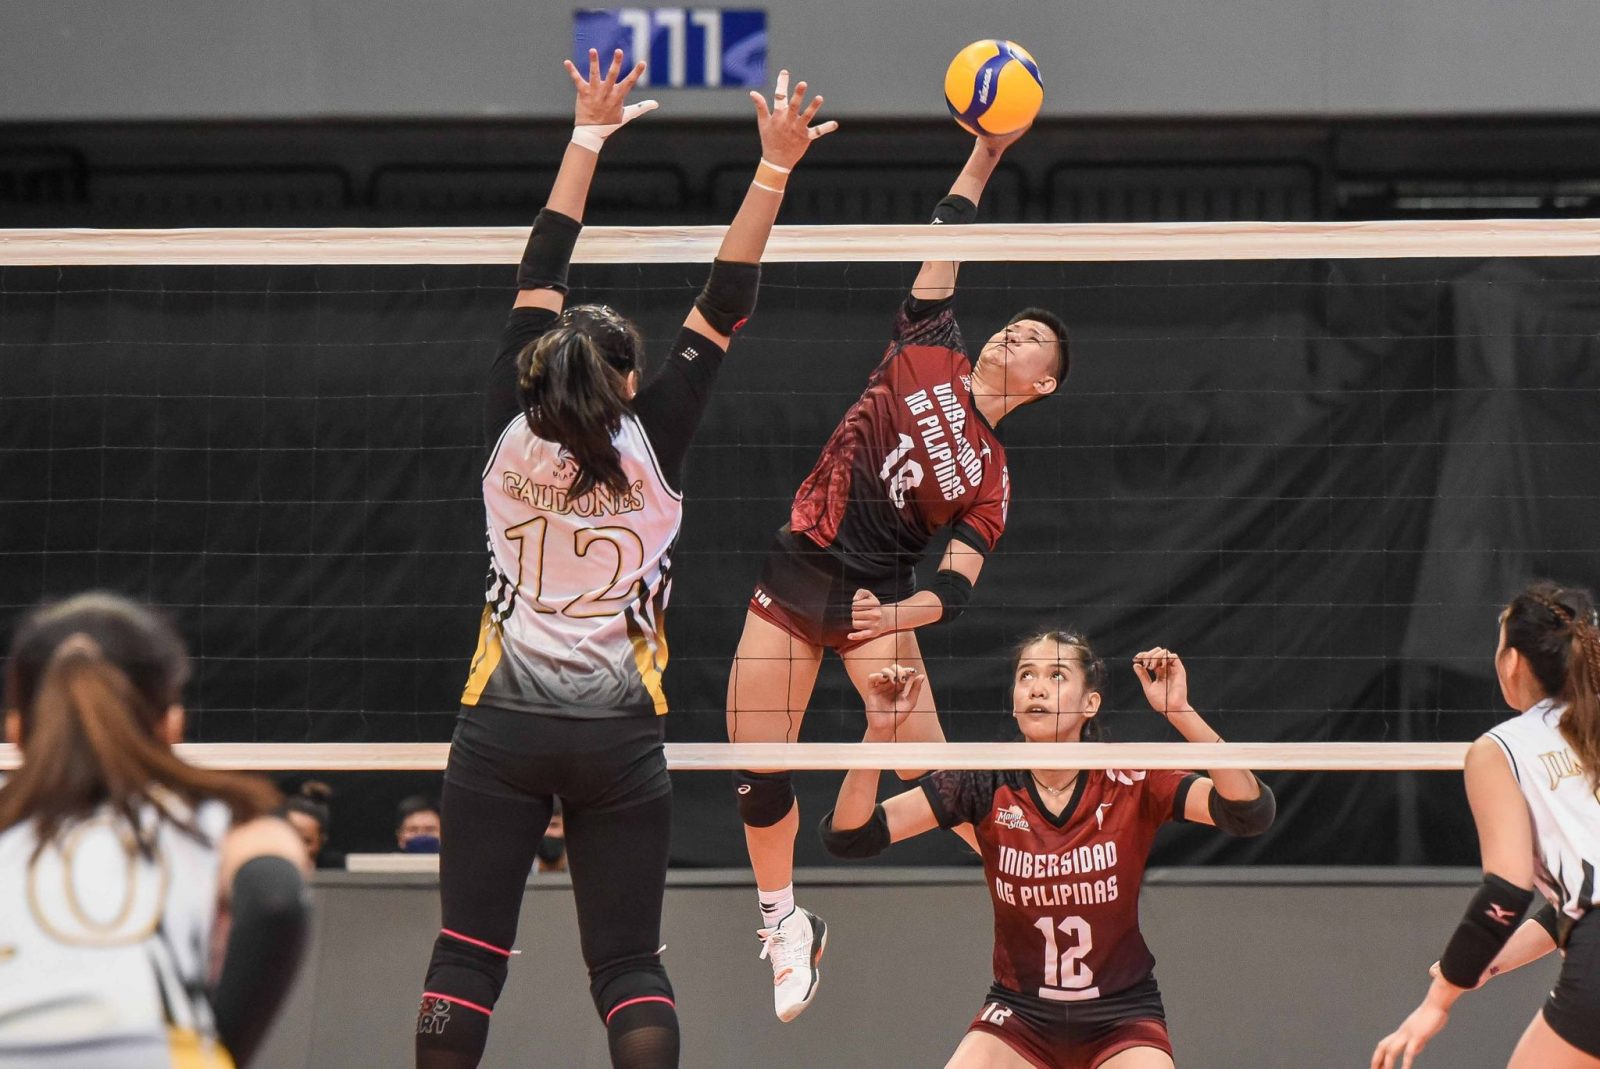 UP clips UST, scores third straight win